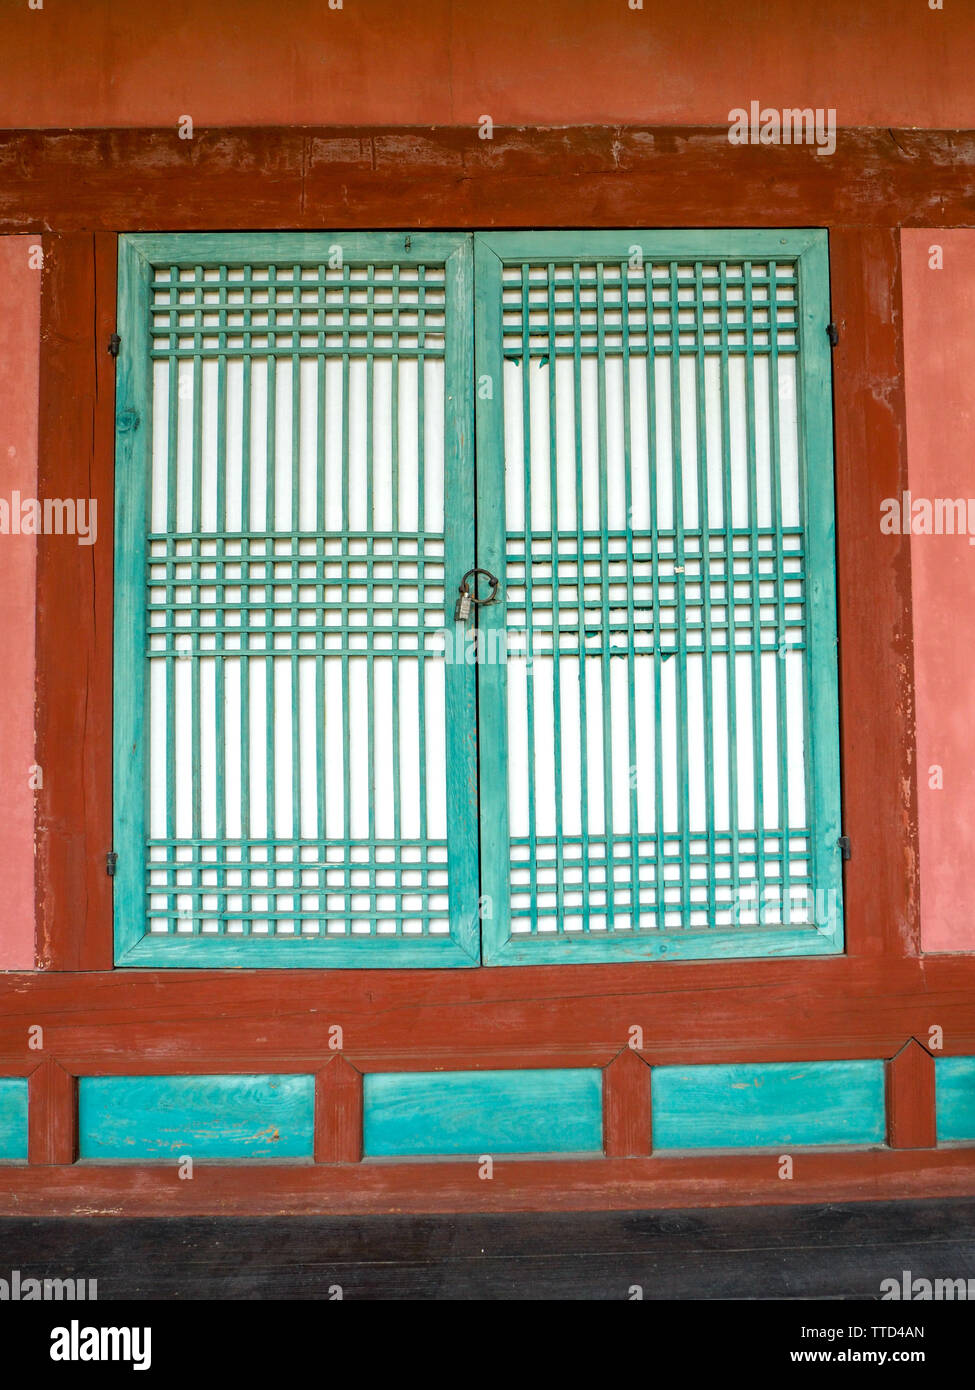 Colorful wooden red and teal window at a confucian temple in Korea Stock Photo